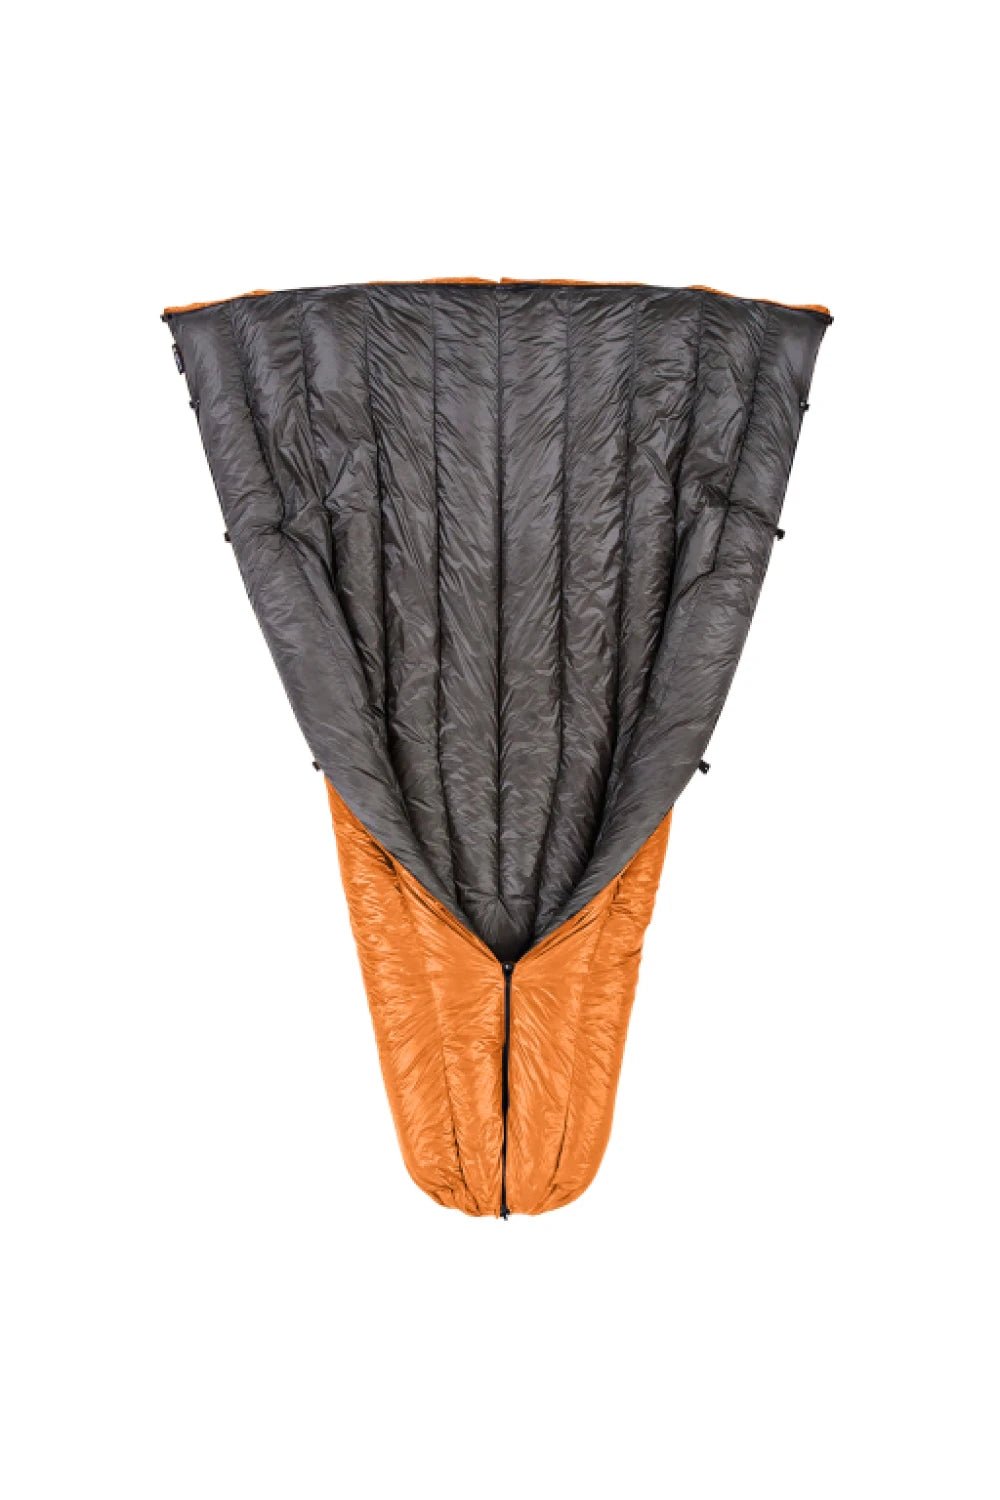 Enlightened Equipment Revelation Quilt 850 Fill Down - Orange / Charcoal | Coffee Outdoors